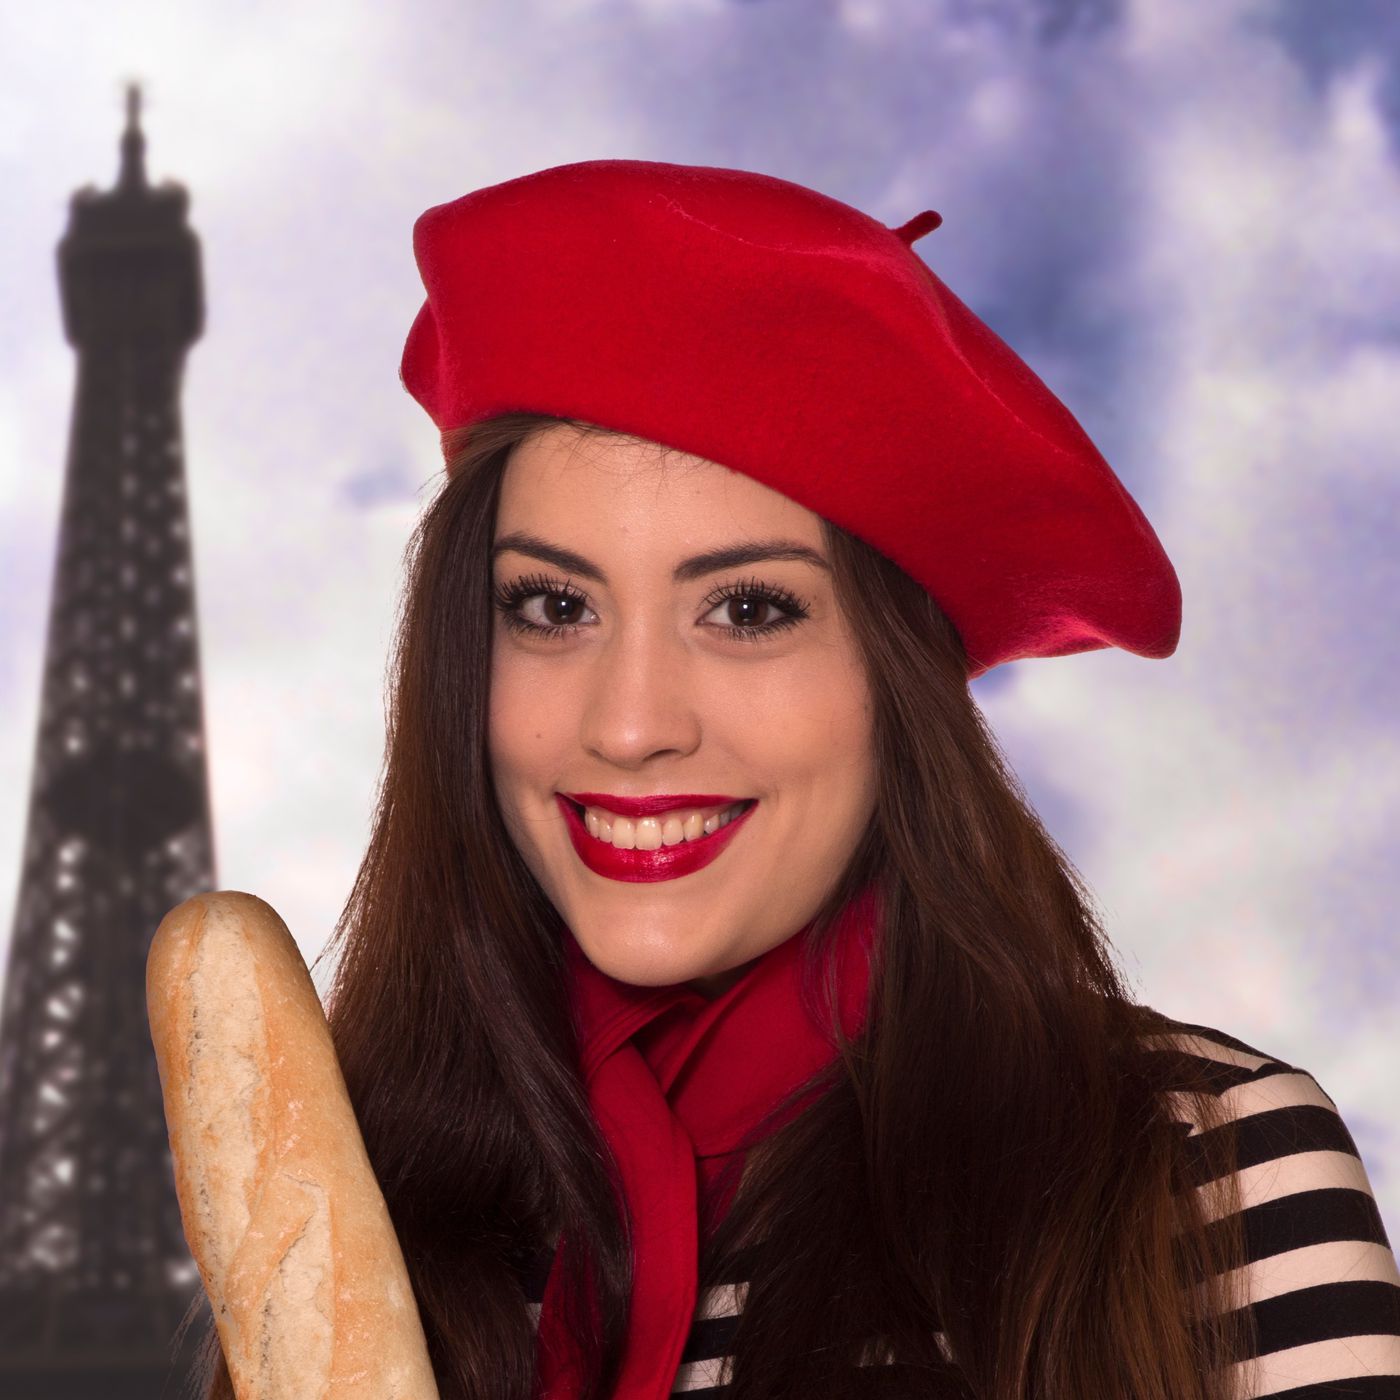 Where Aspirational French Lady Articles Come From - Racked